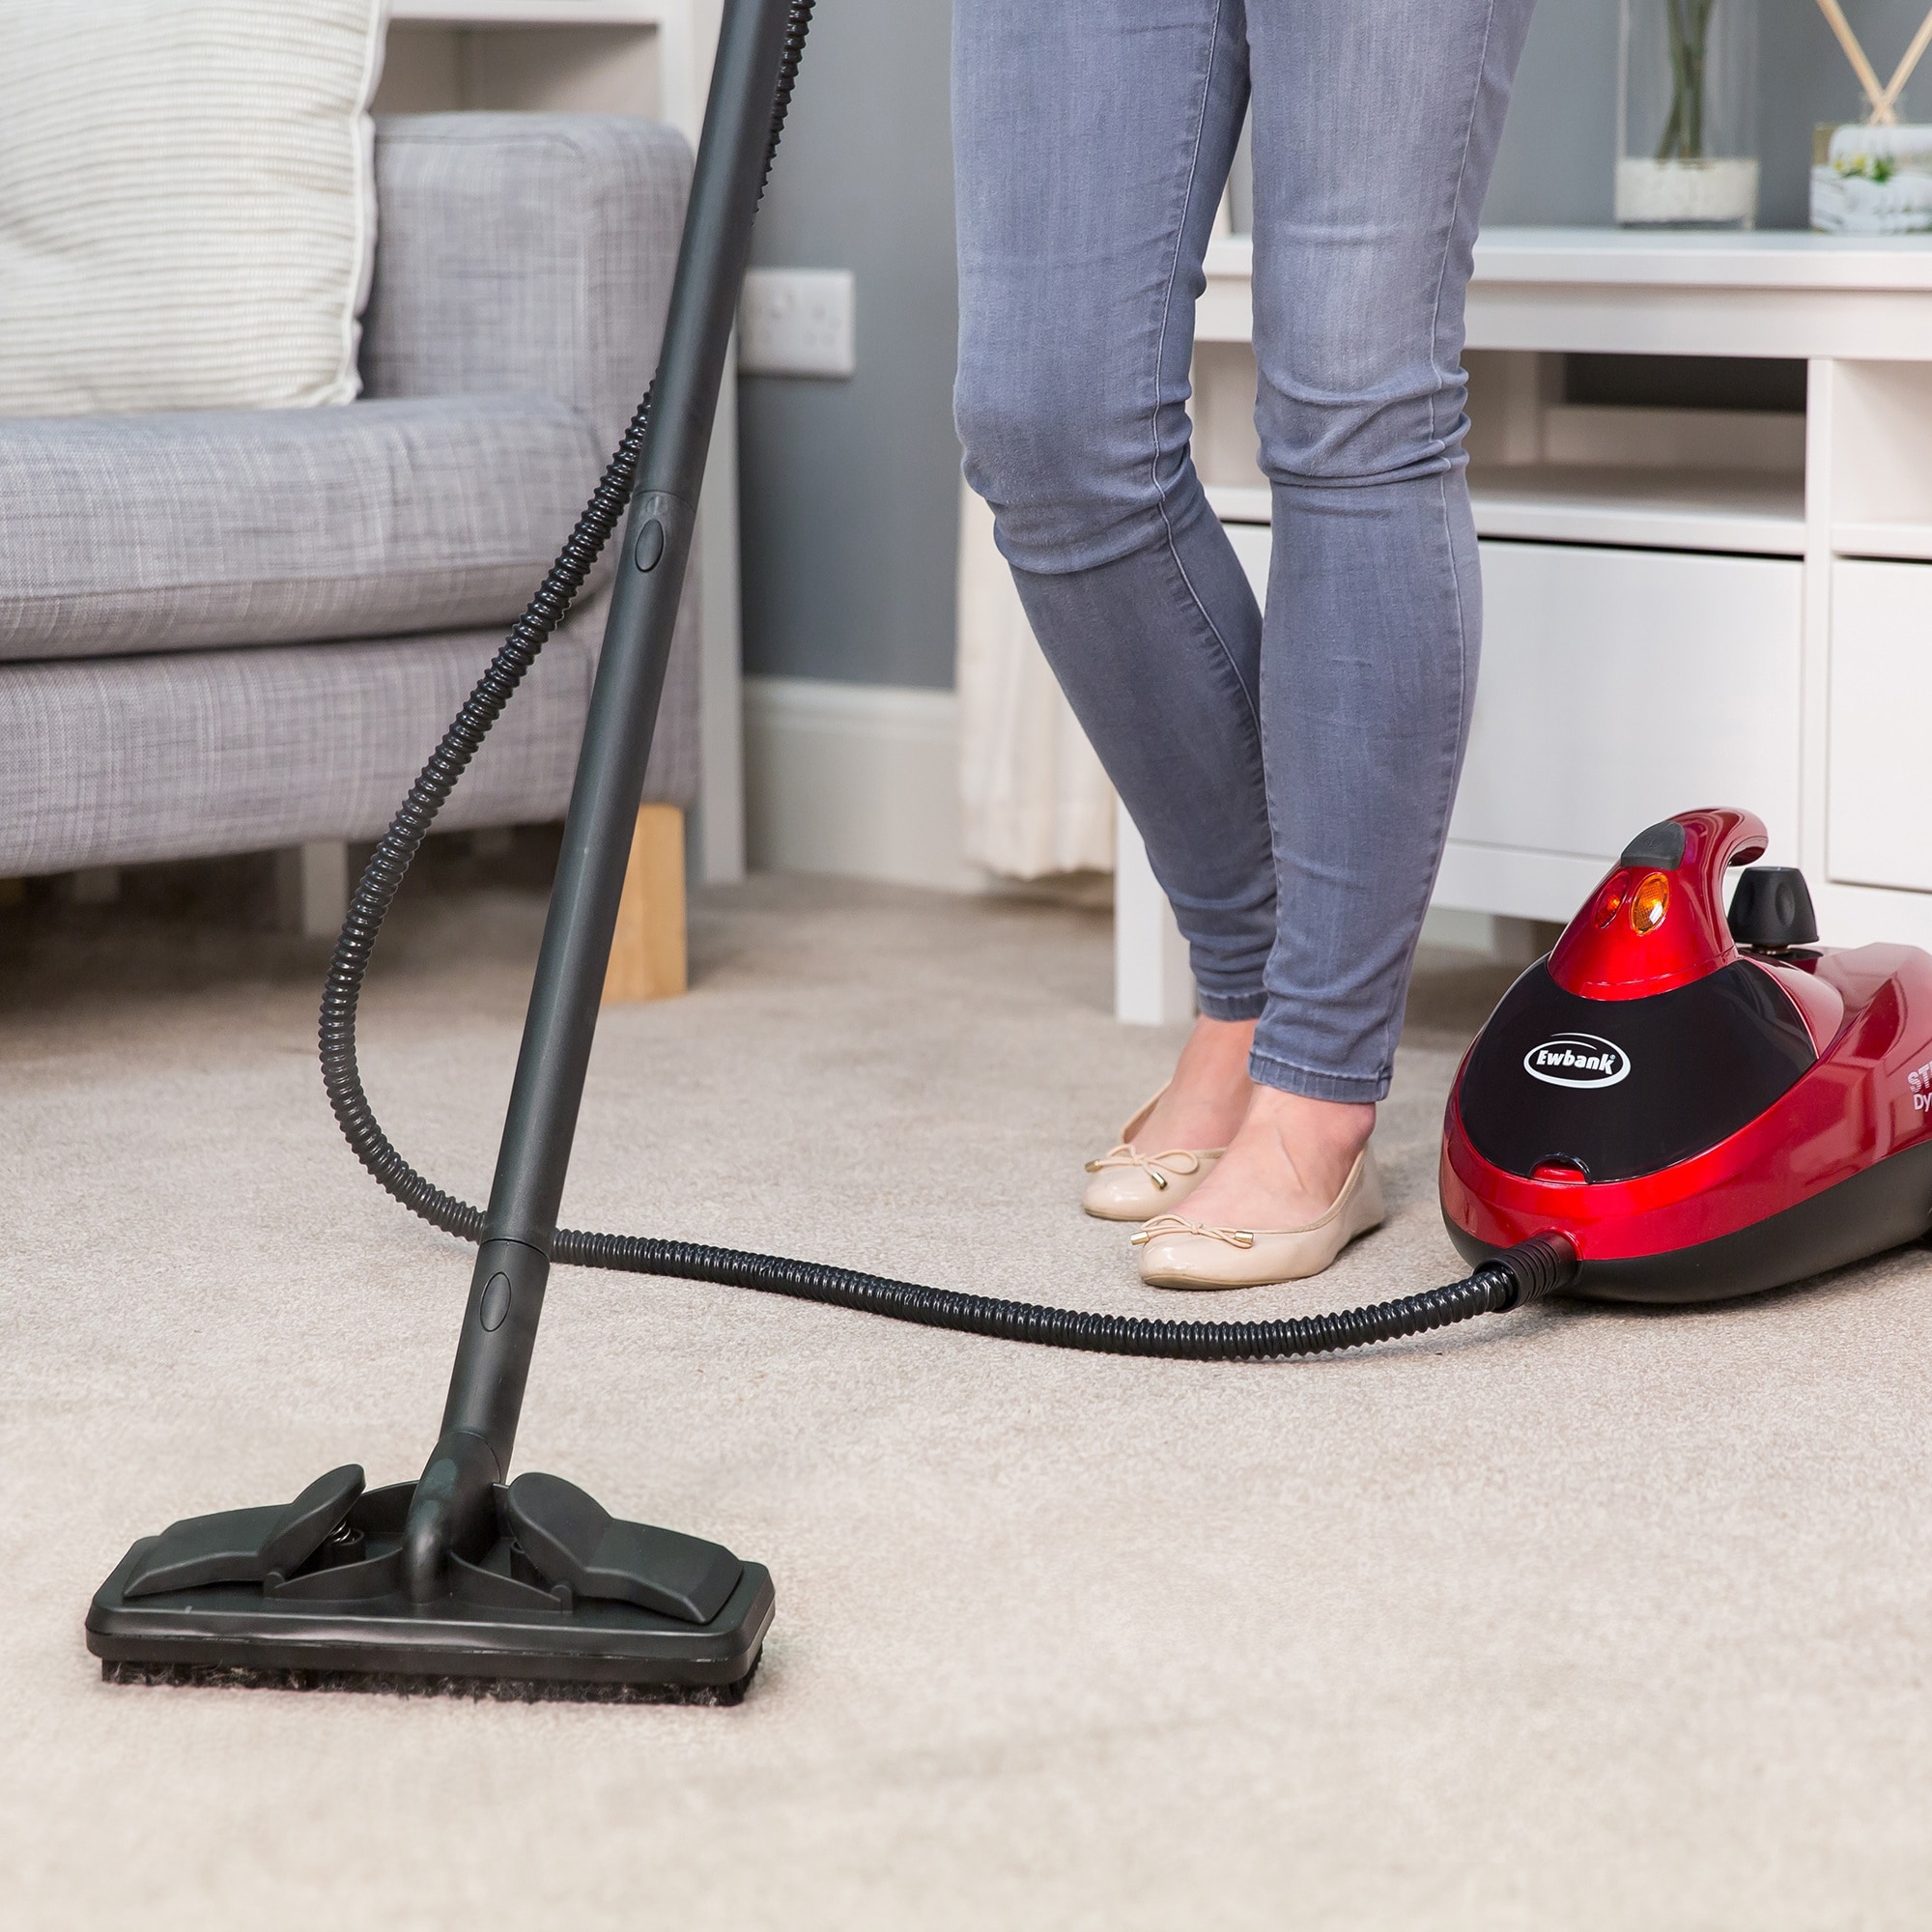 The Virus And Germ Destroying Convertible Steam Cleaner